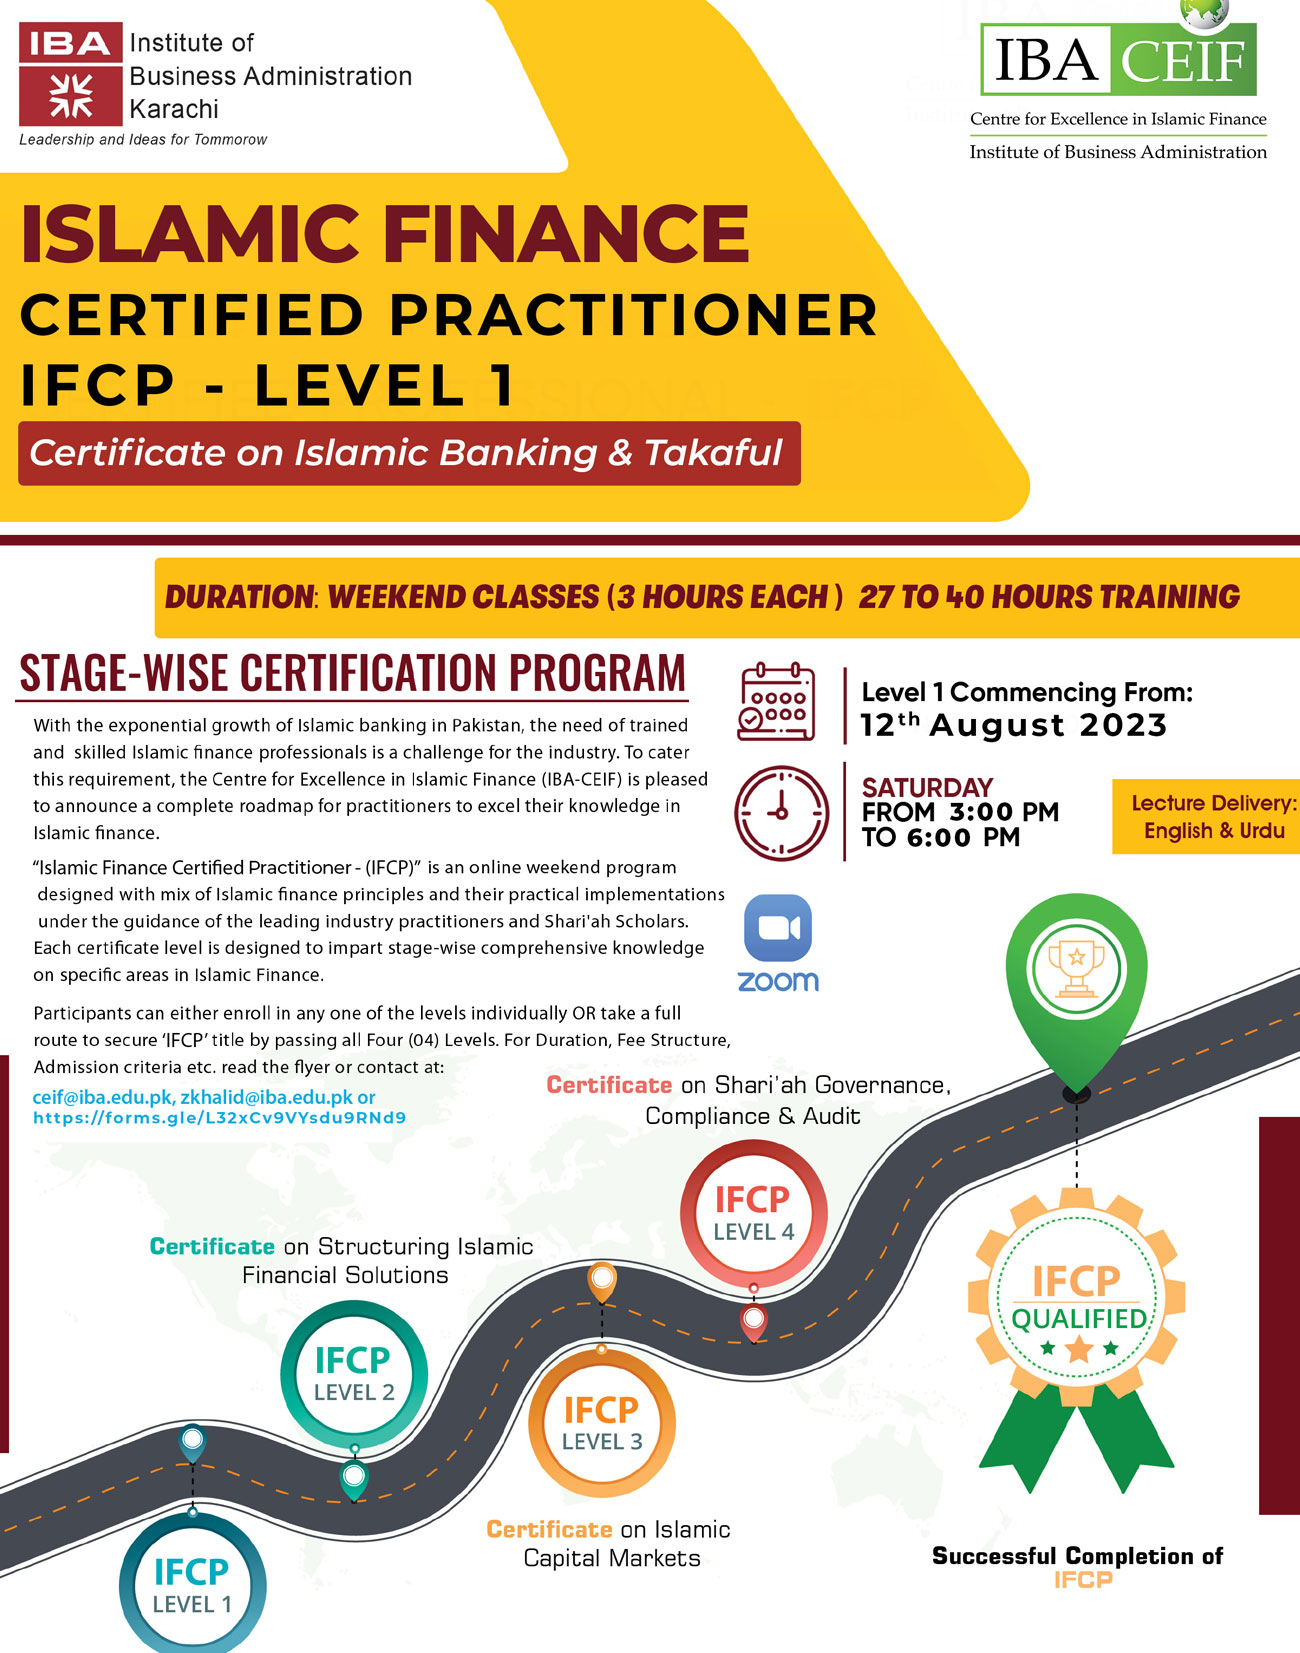 Islamic Finance Certified Practitioner (IFCP)